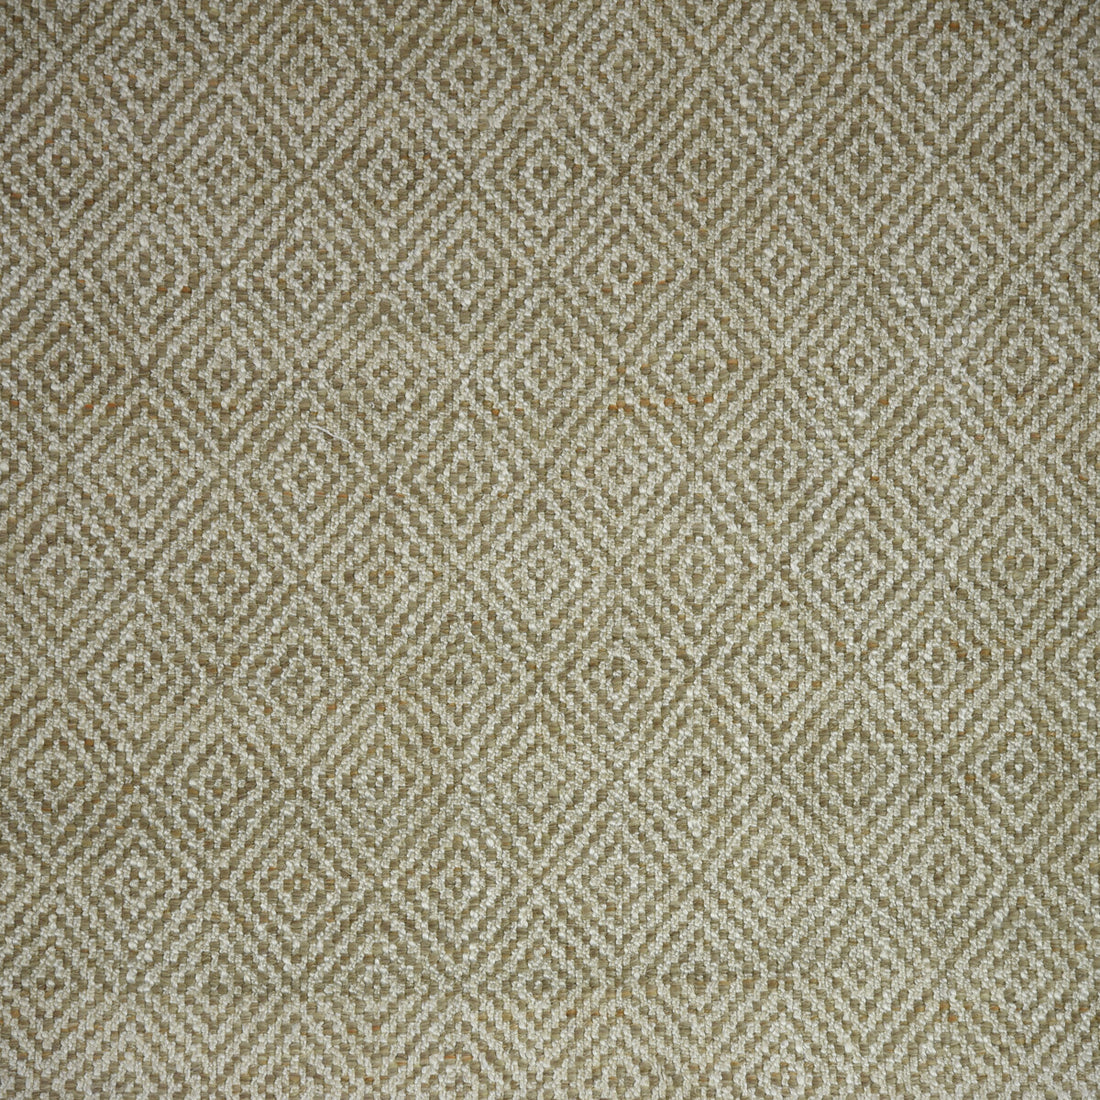 Izu fabric in melon color - pattern 35446.1612.0 - by Kravet Couture in the Izu Collection collection